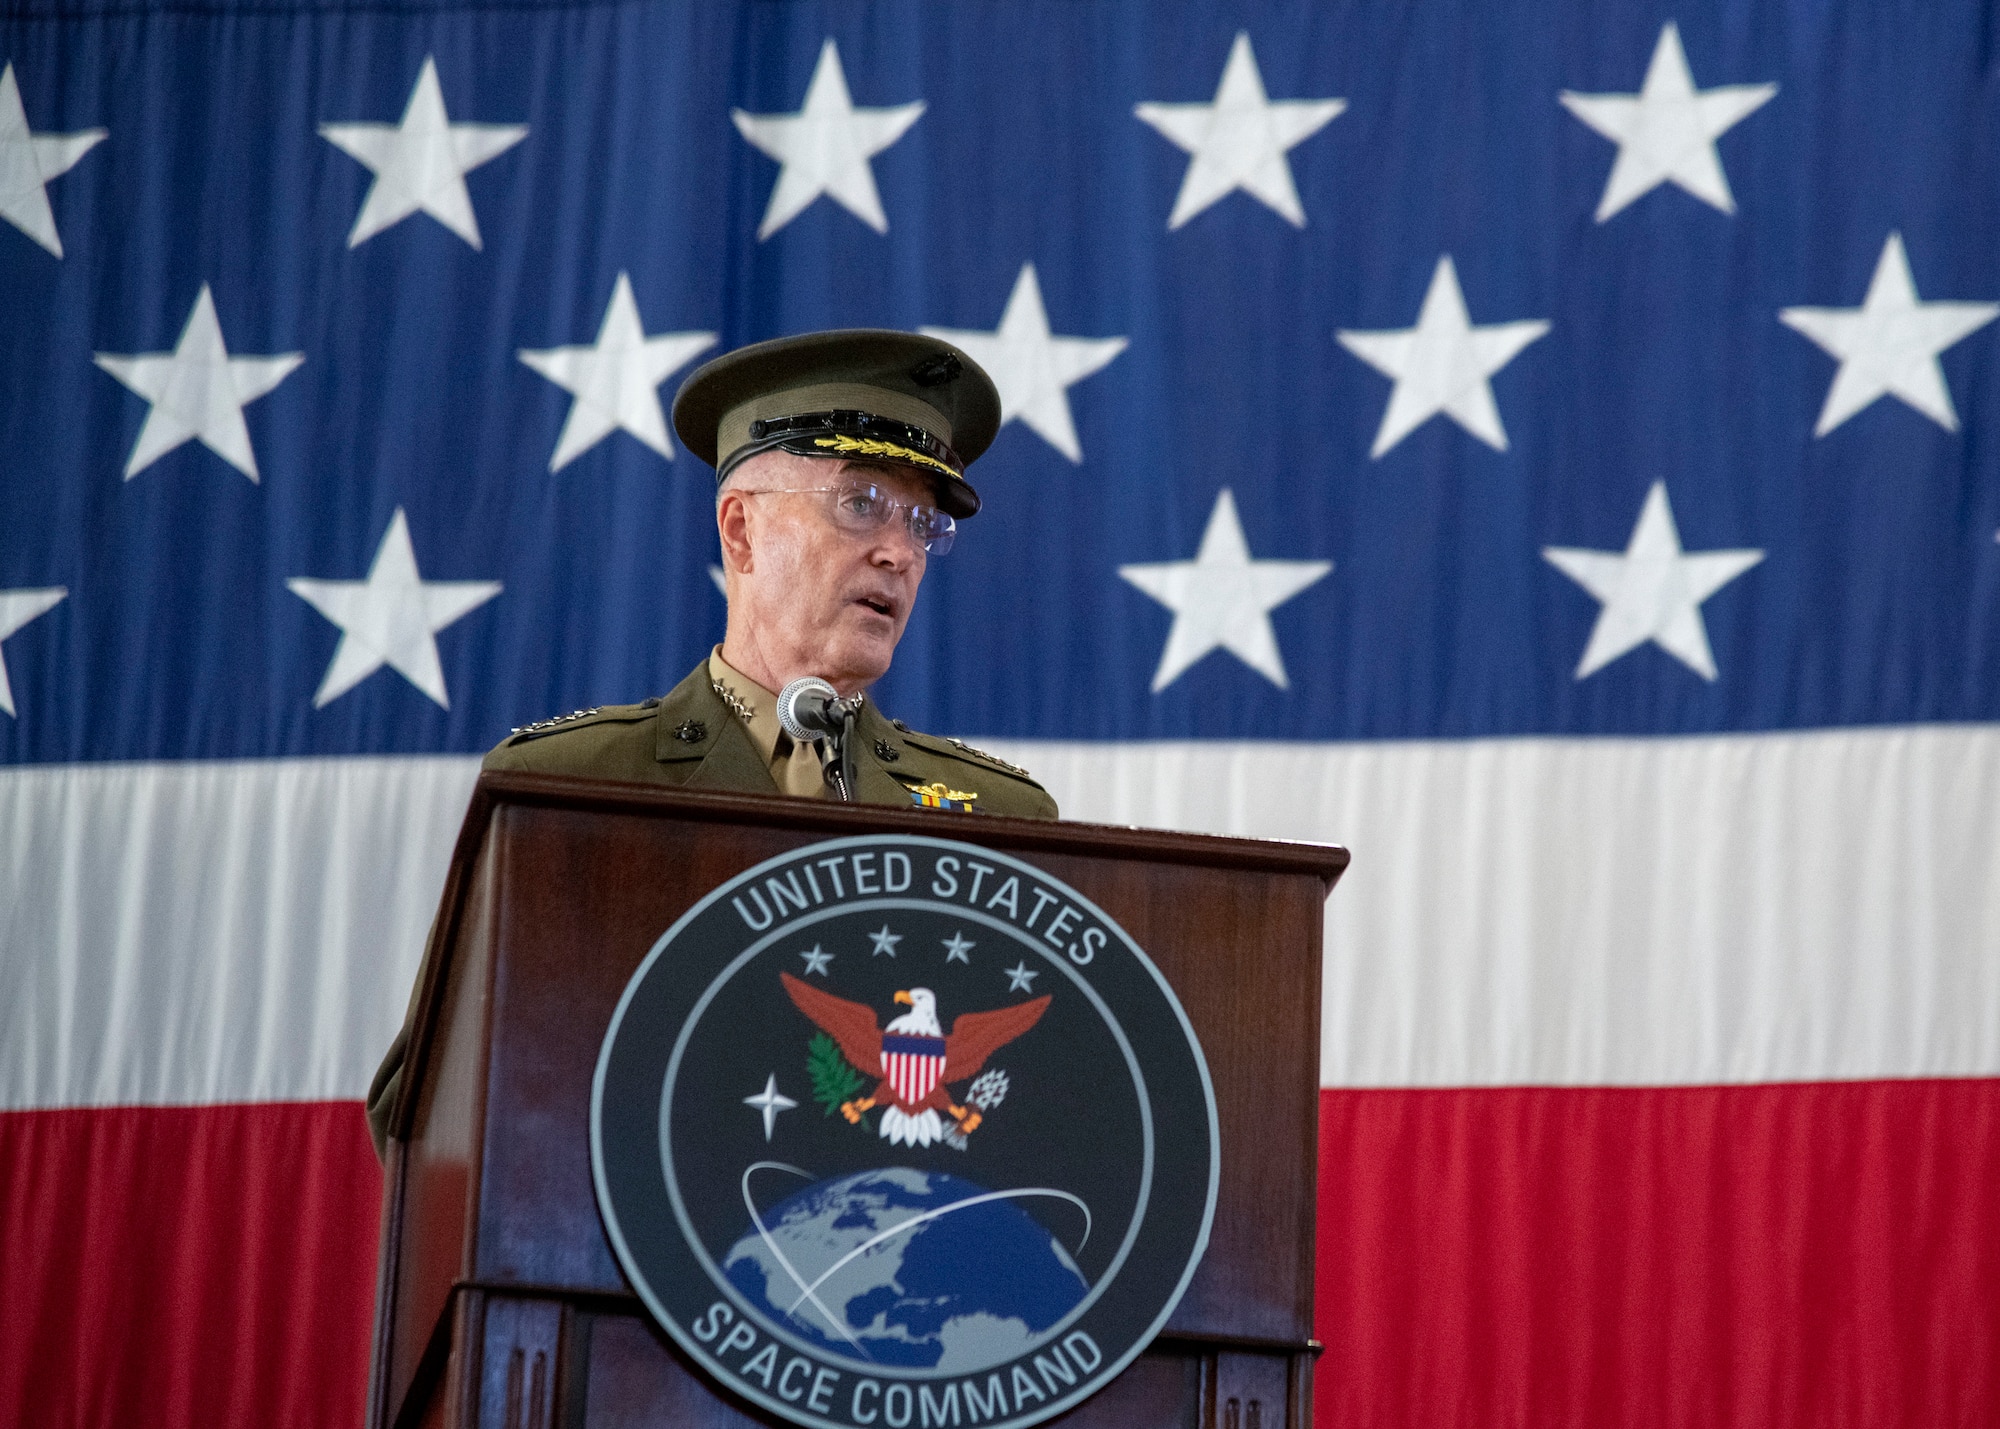 Marine Corps Gen. Joe Dunford, chairman of the Joint Chiefs of Staff, delivers remarks at the U.S. Space Command Recognition and Establishment Ceremony at Peterson Air Force Base, Colorado Sept. 9, 2019.